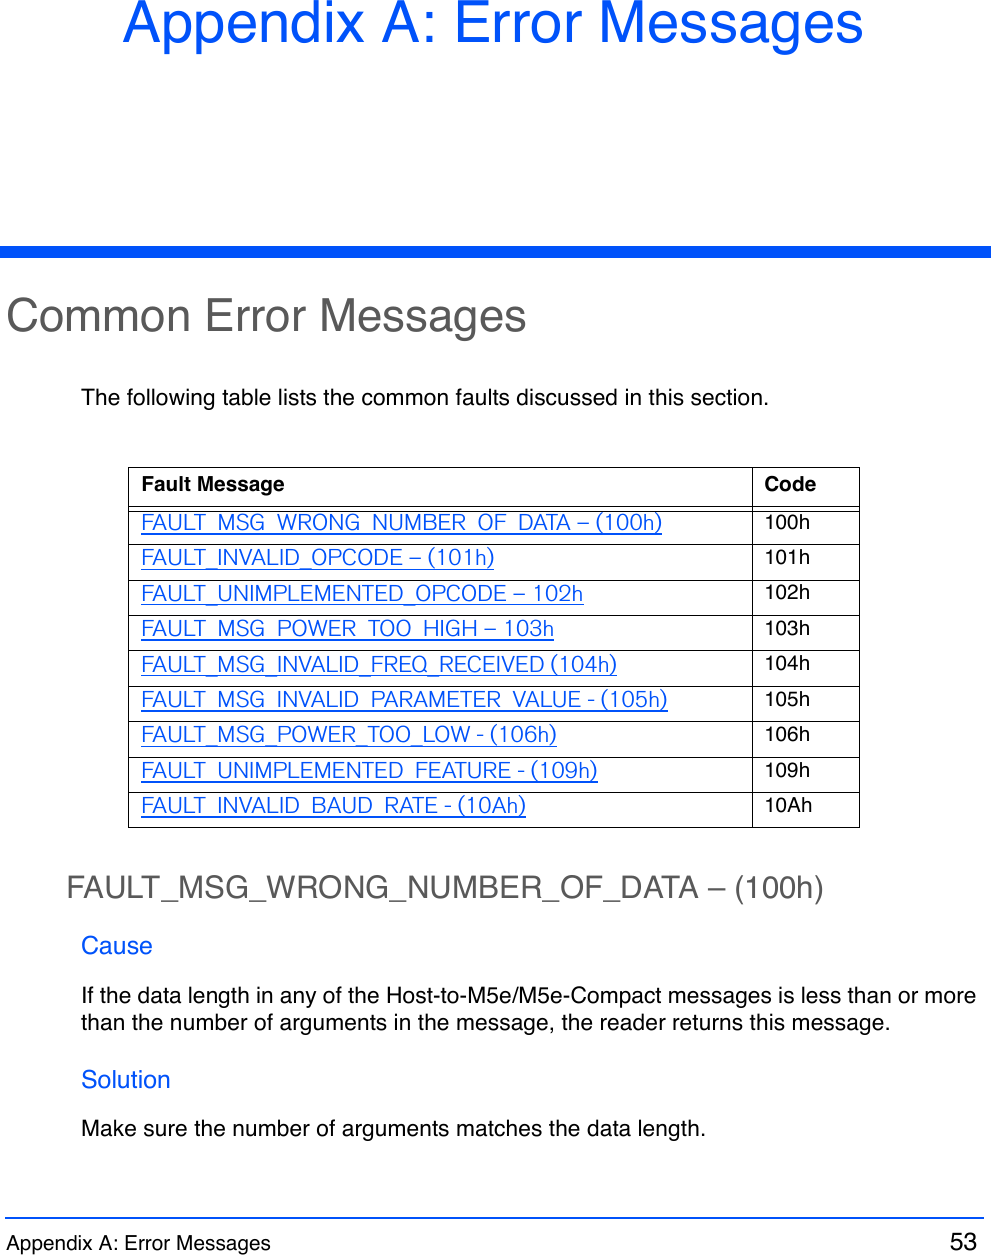 Appendix A: Error Messages  53 Appendix A: Error MessagesCommon Error MessagesThe following table lists the common faults discussed in this section.FAULT_MSG_WRONG_NUMBER_OF_DATA – (100h)CauseIf the data length in any of the Host-to-M5e/M5e-Compact messages is less than or more than the number of arguments in the message, the reader returns this message.SolutionMake sure the number of arguments matches the data length.Fault Message CodeFAULT_MSG_WRONG_NUMBER_OF_DATA – (100h) 100hFAULT_INVALID_OPCODE – (101h) 101hFAULT_UNIMPLEMENTED_OPCODE – 102h 102hFAULT_MSG_POWER_TOO_HIGH – 103h 103hFAULT_MSG_INVALID_FREQ_RECEIVED (104h) 104hFAULT_MSG_INVALID_PARAMETER_VALUE - (105h) 105hFAULT_MSG_POWER_TOO_LOW - (106h) 106hFAULT_UNIMPLEMENTED_FEATURE - (109h) 109hFAULT_INVALID_BAUD_RATE - (10Ah) 10Ah